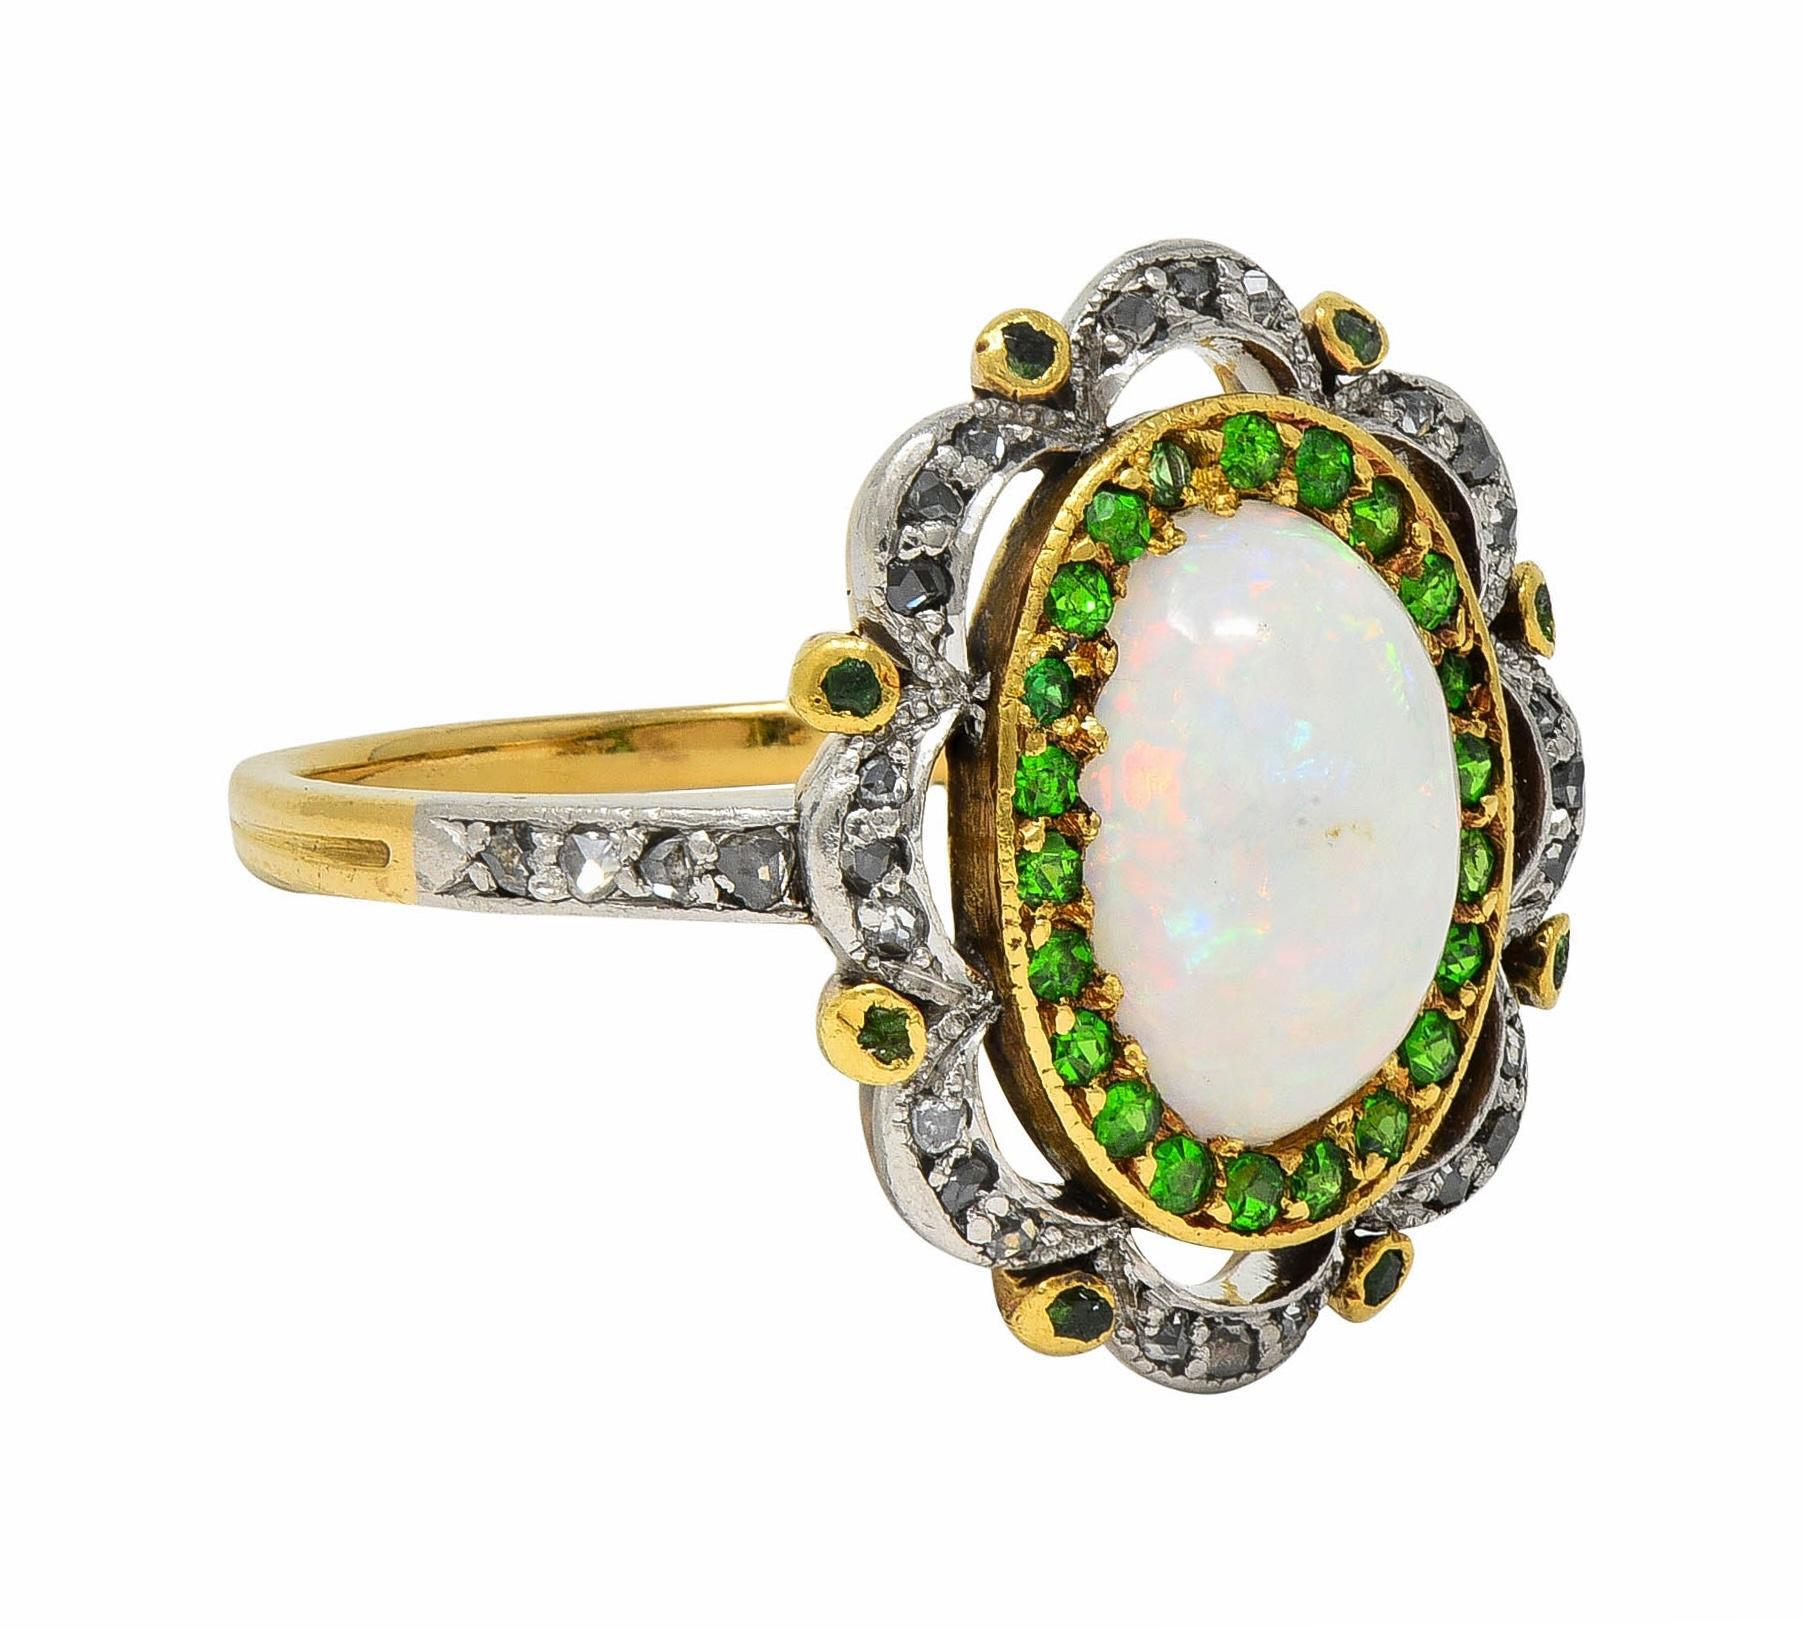 Centering an oval-shaped opal cabochon - white in body color with spectral play-of-color
Measuring 6.5 x 9.5 mm - bead set in yellow gold with halo surround of demantoid garnets 
Round cut and bead set with additional granter bezel set